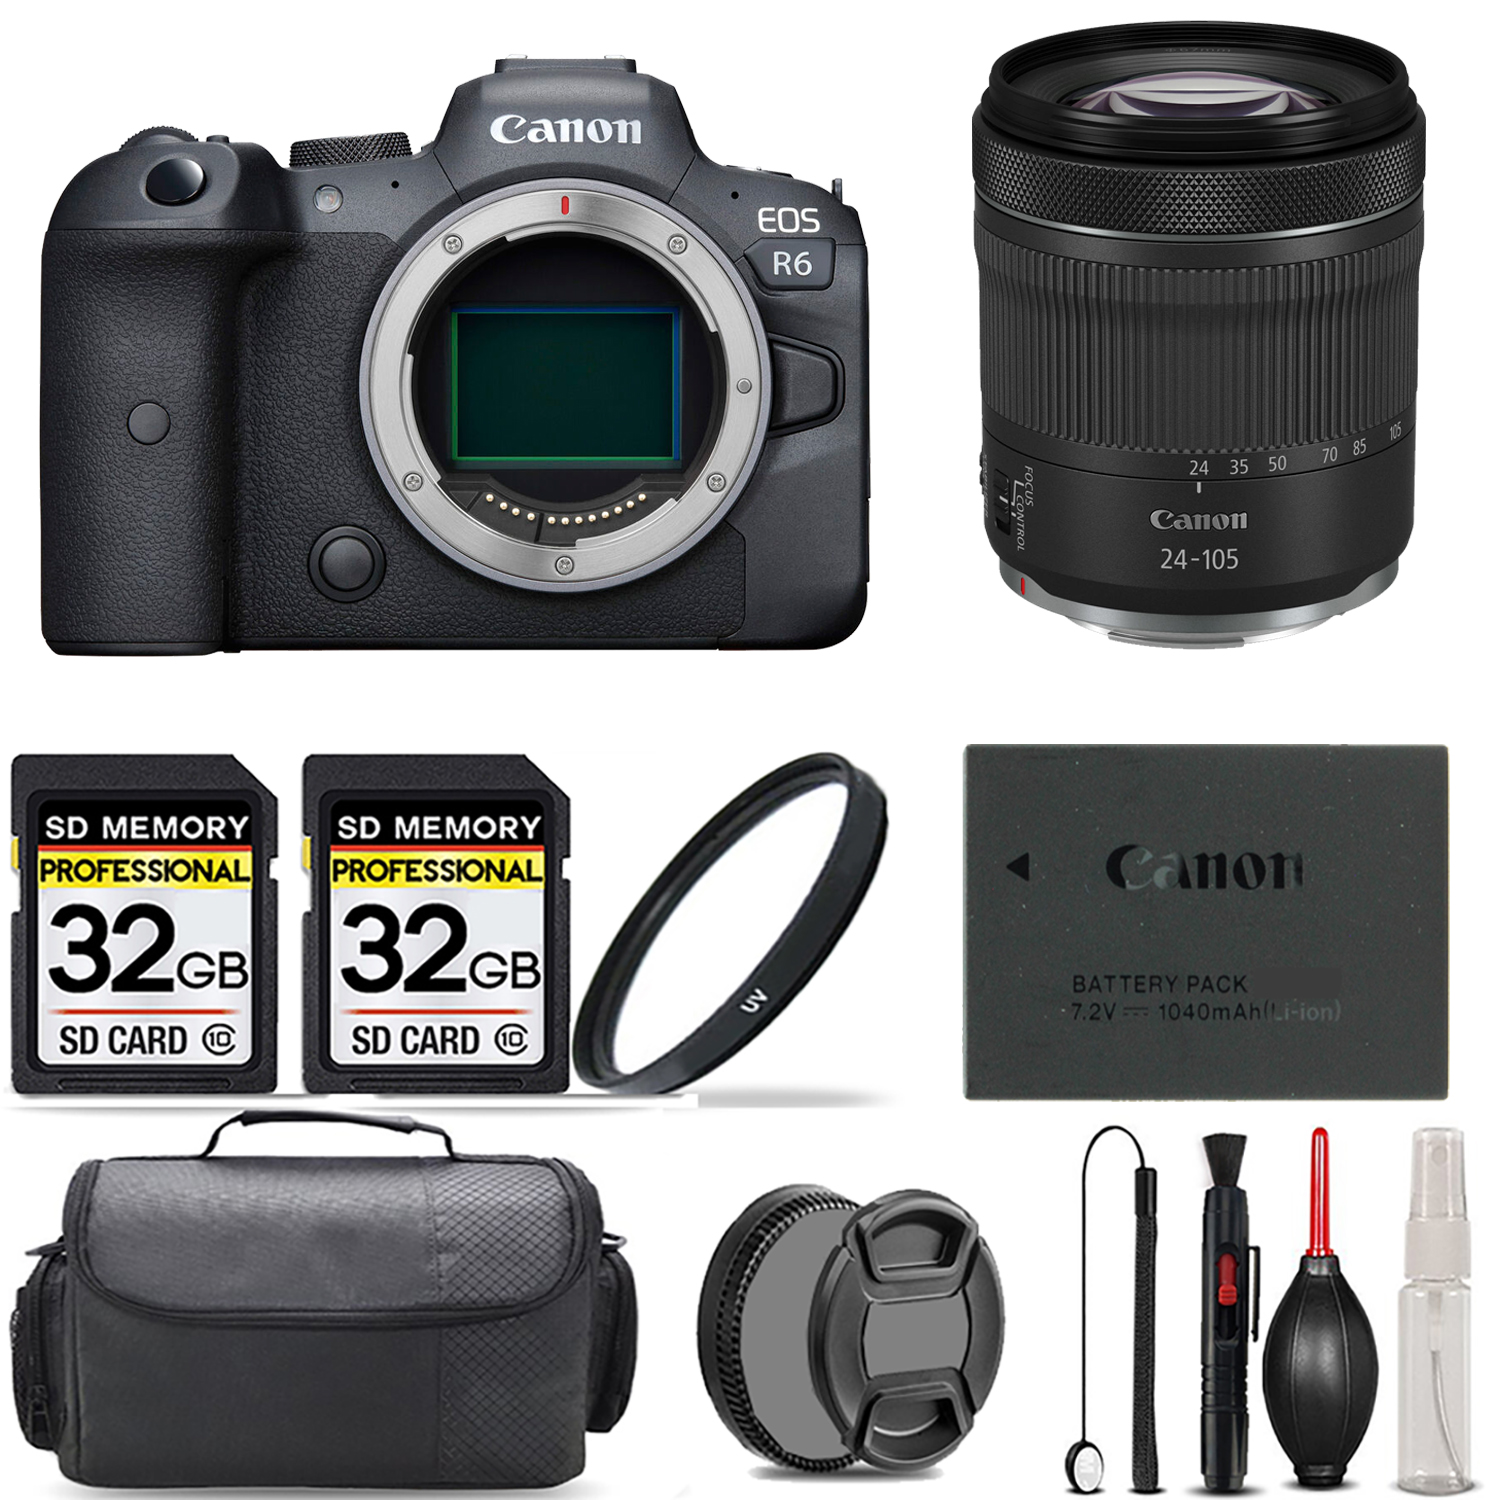 EOS R6 Camera + 24-105mm IS STM Lens + UV Filter + 64GB + Bag & More! *FREE SHIPPING*